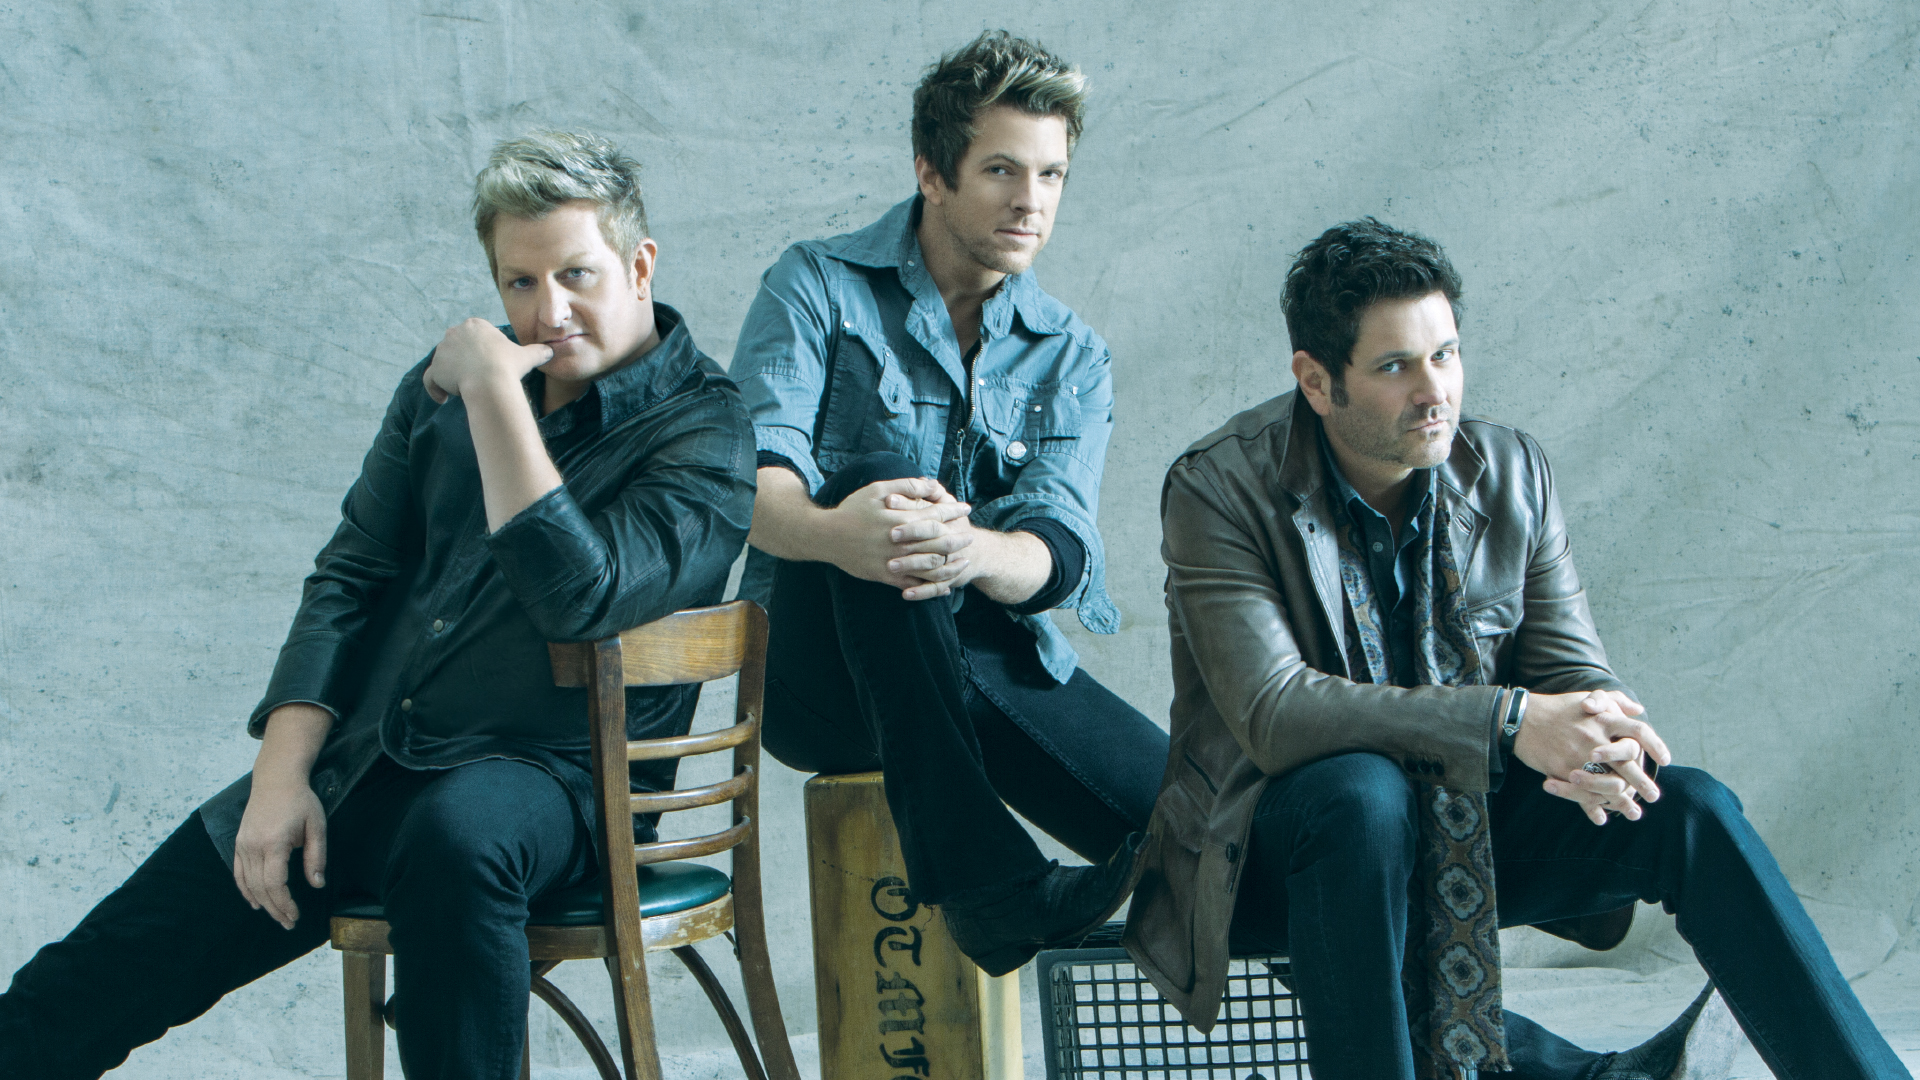 Rascal Flatts, Reba McEntire, Carrie Underwood, And More To Perform At The 52nd ACM Awards1920 x 1080